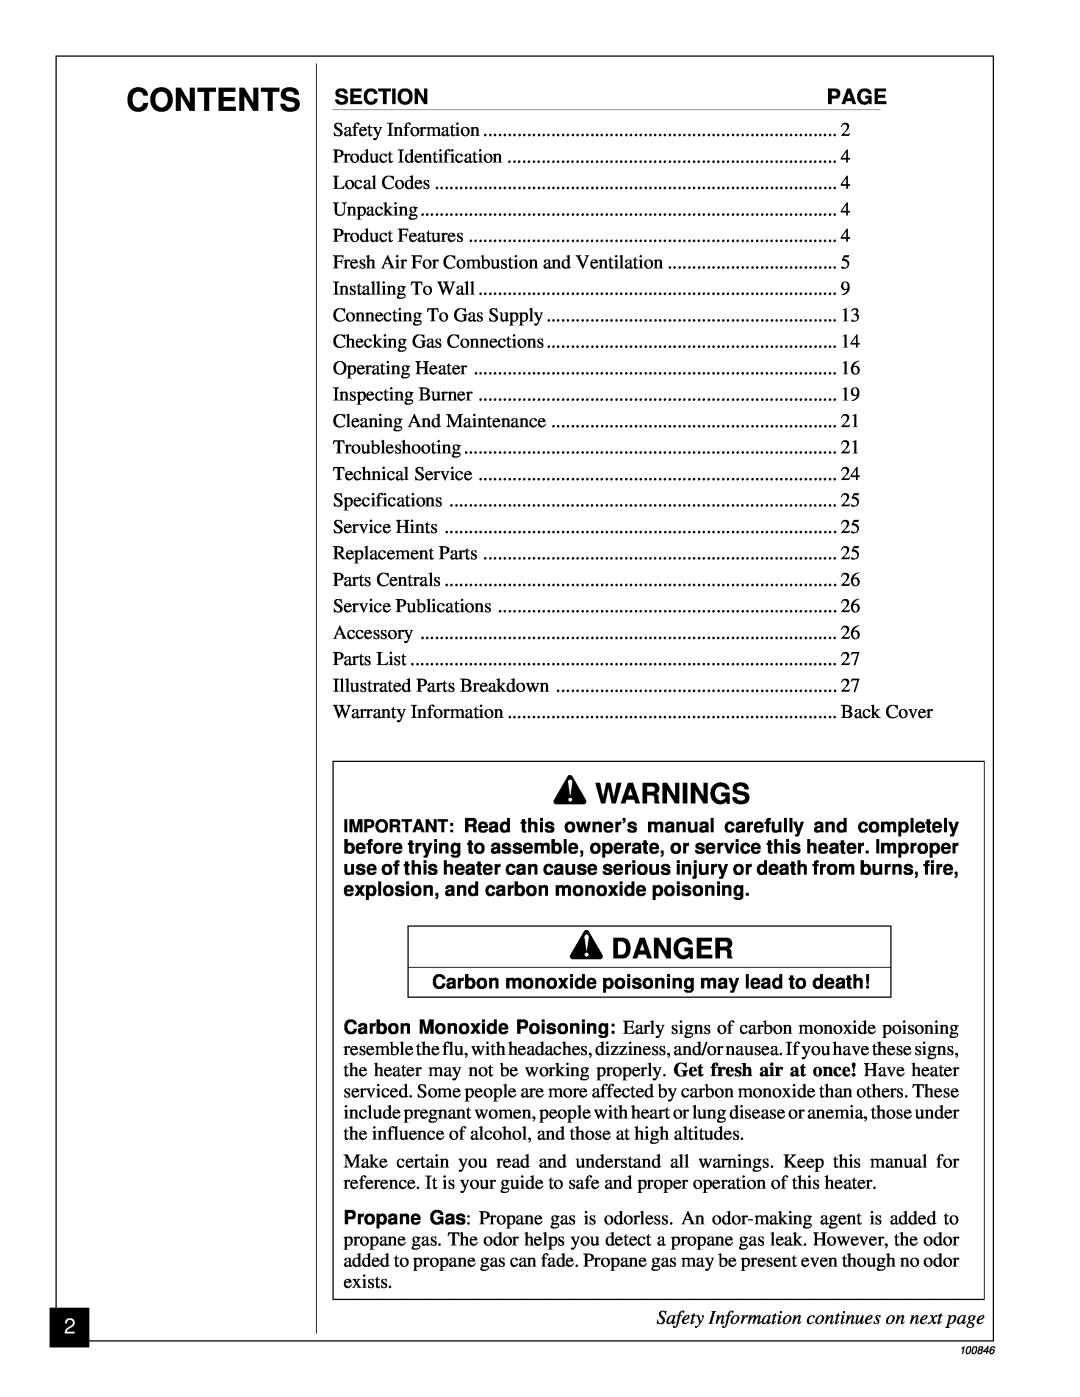 Desa CGP11A installation manual Contents, Warnings, Danger, Safety Information continues on next page 